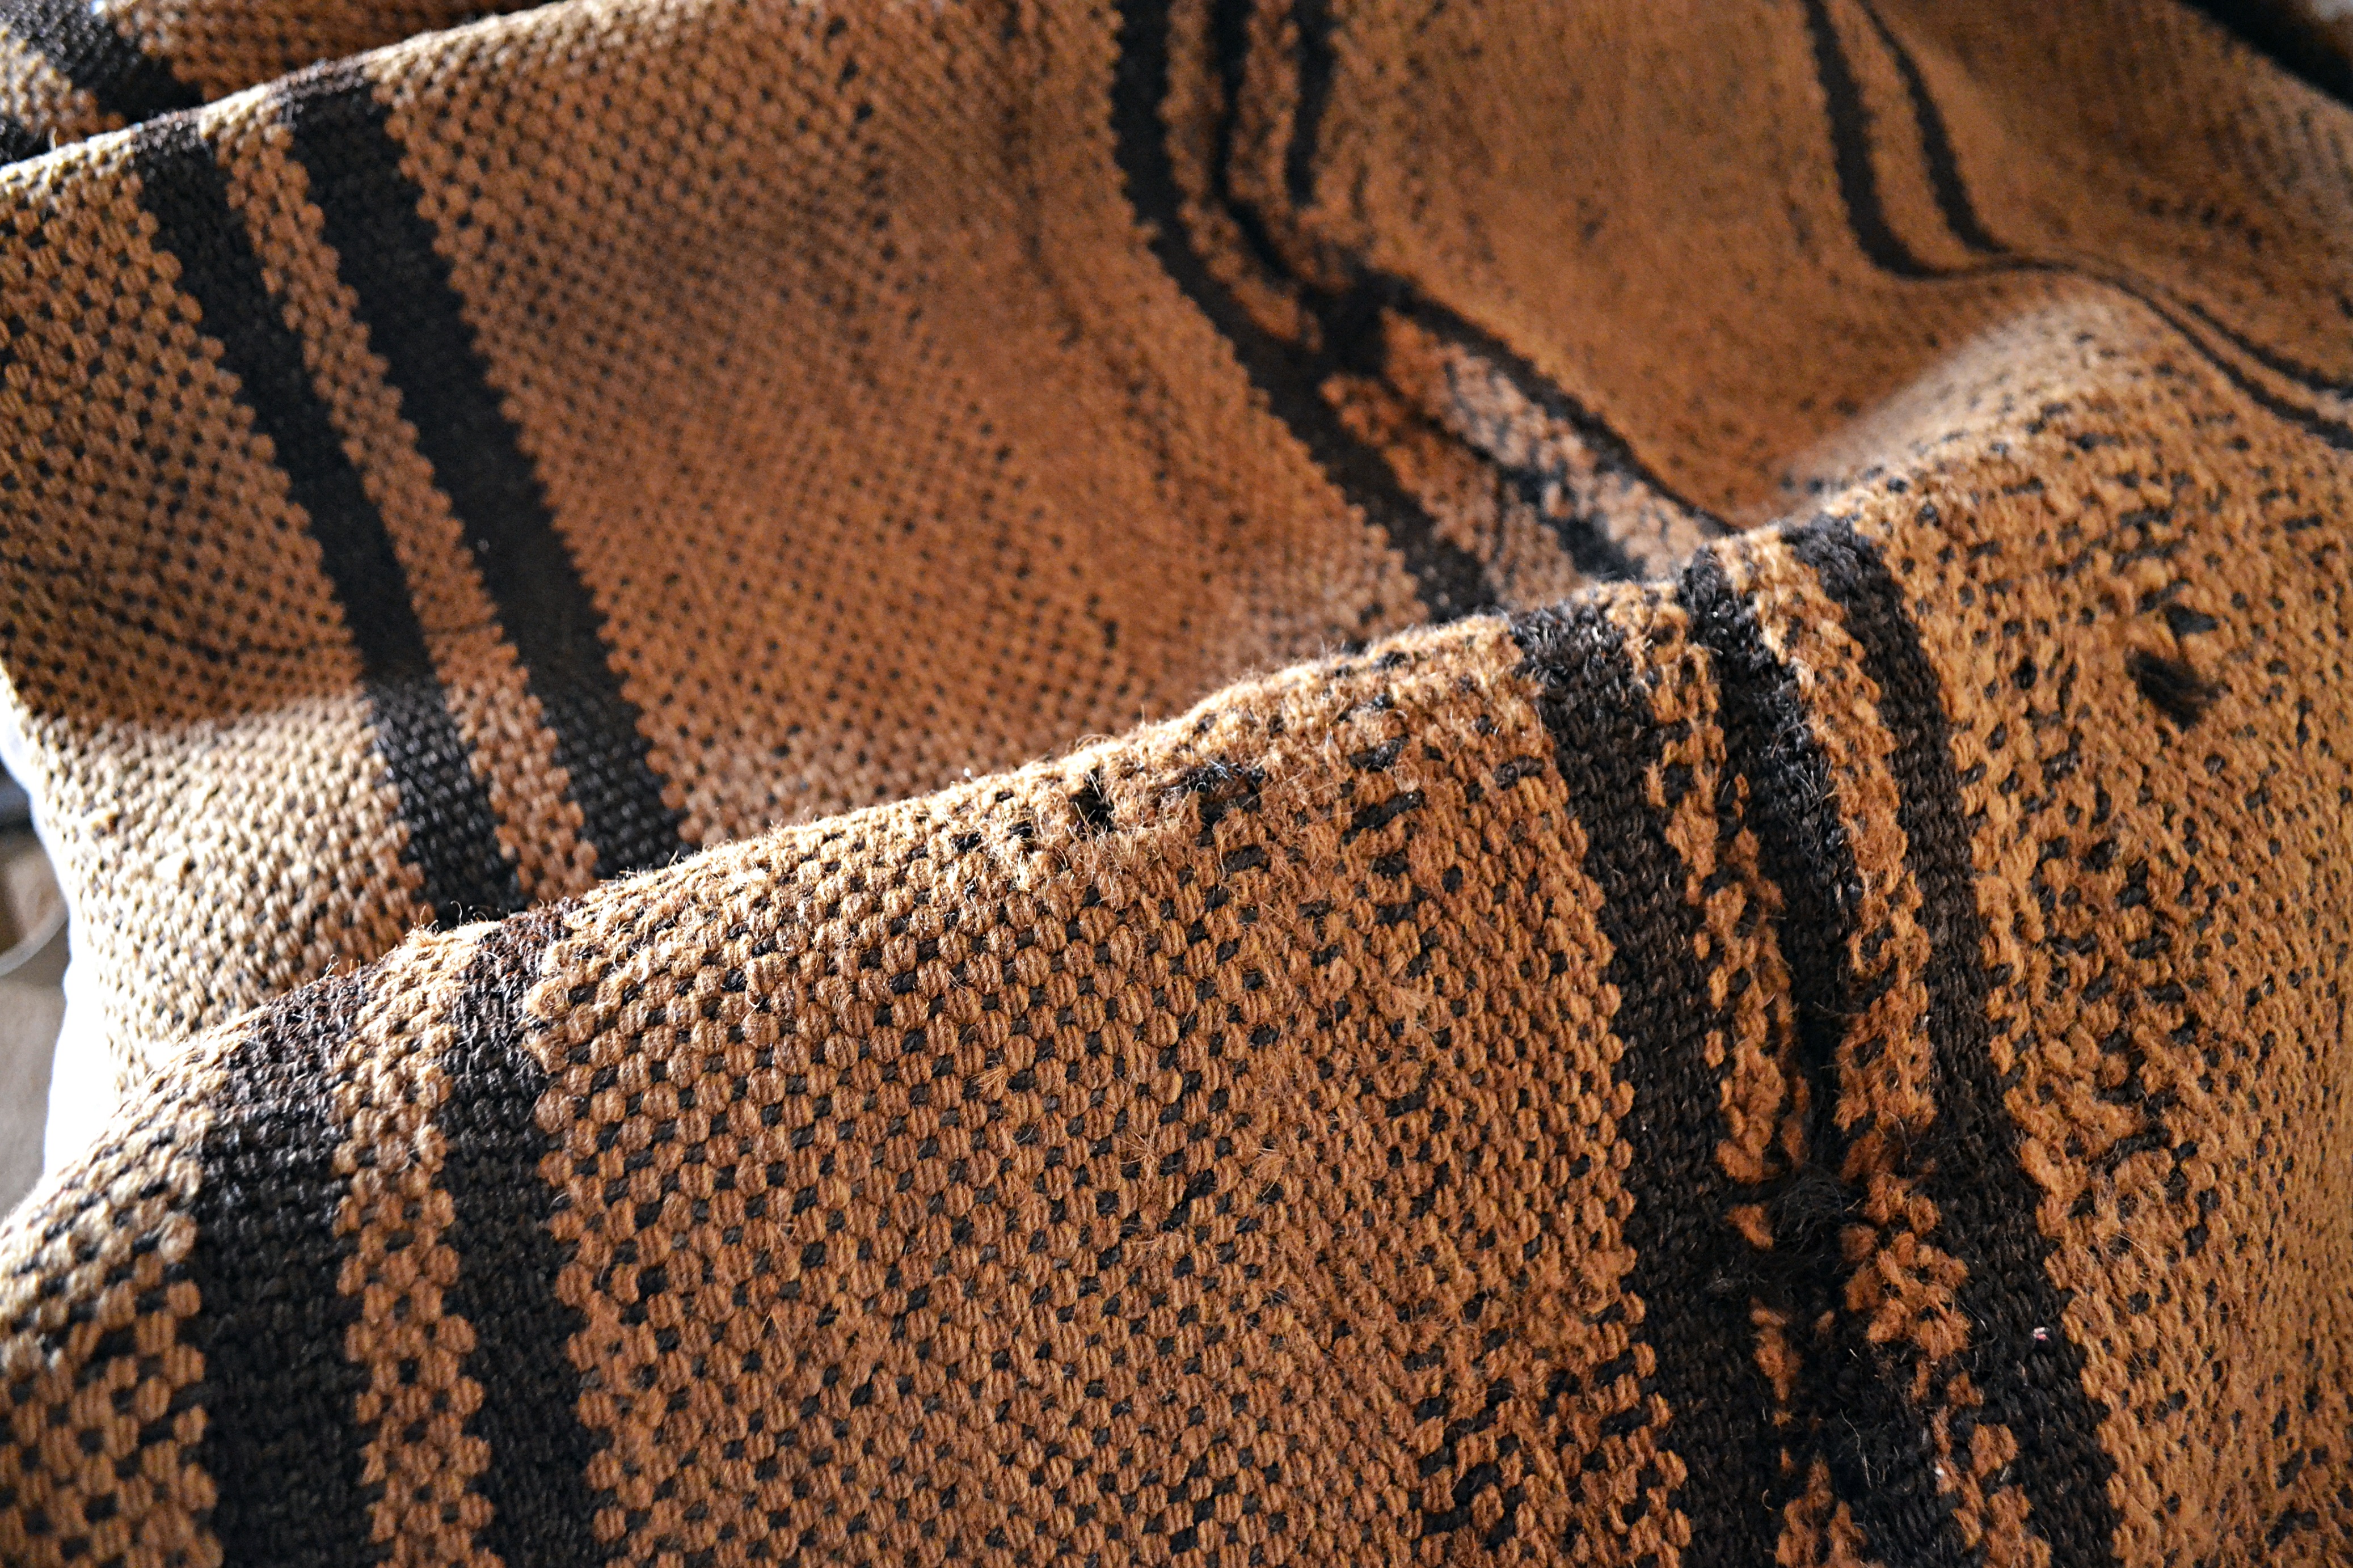 Many household items are still made using available natural materials, such as this blanket woven from camel hair. Photo by Stuti Bhadauria